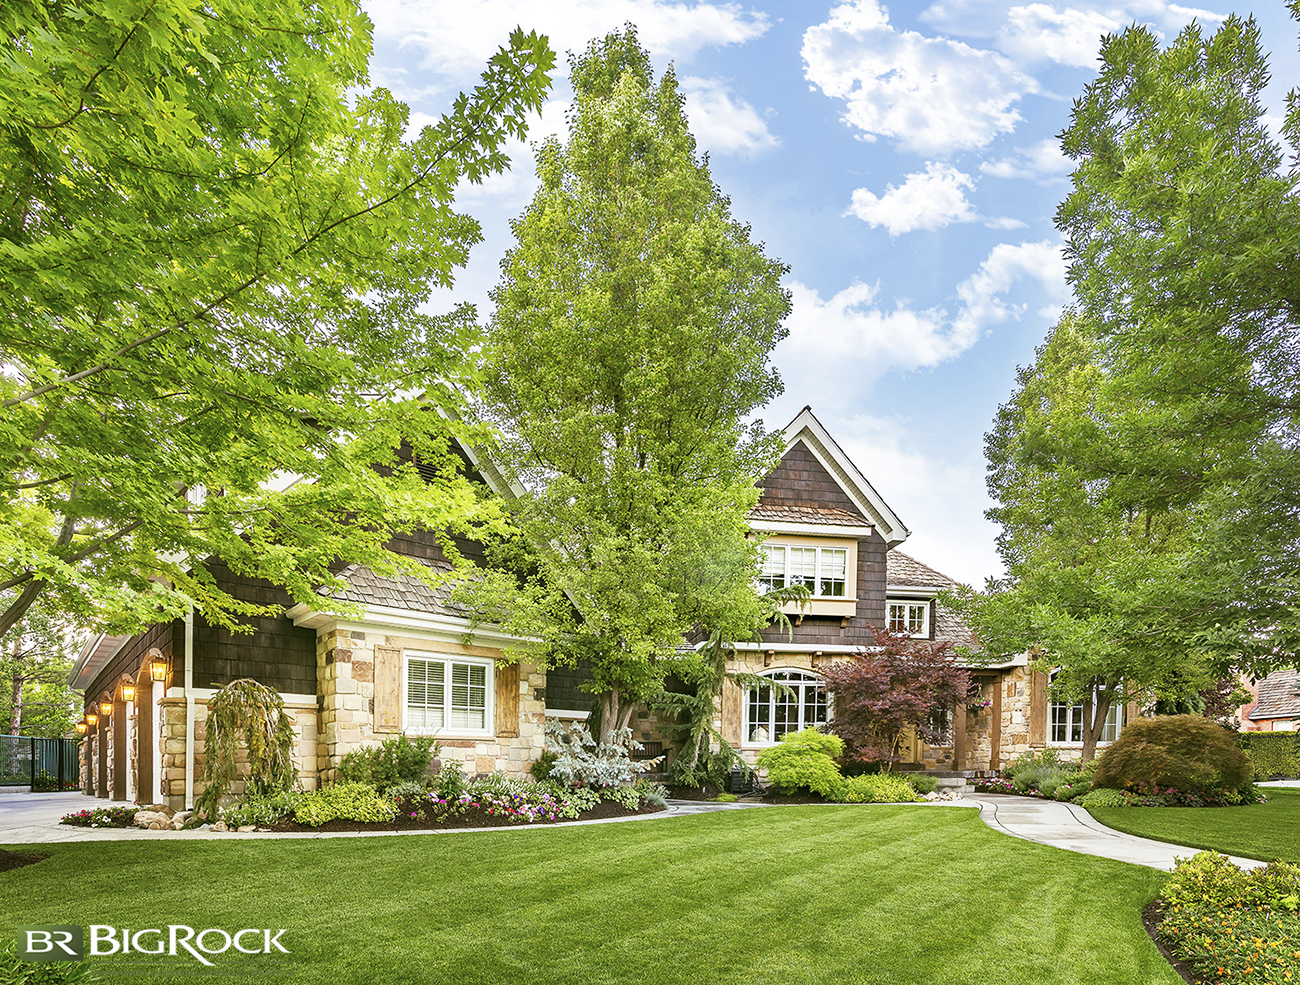 Step up your landscaping design with Big Rock Landscaping’s luxury home landscaping ideas. Whether you want a built in fire pit, water features, sports court, tropical gardens or more, Big Rock Landscaping is your choice landscaping contractor.